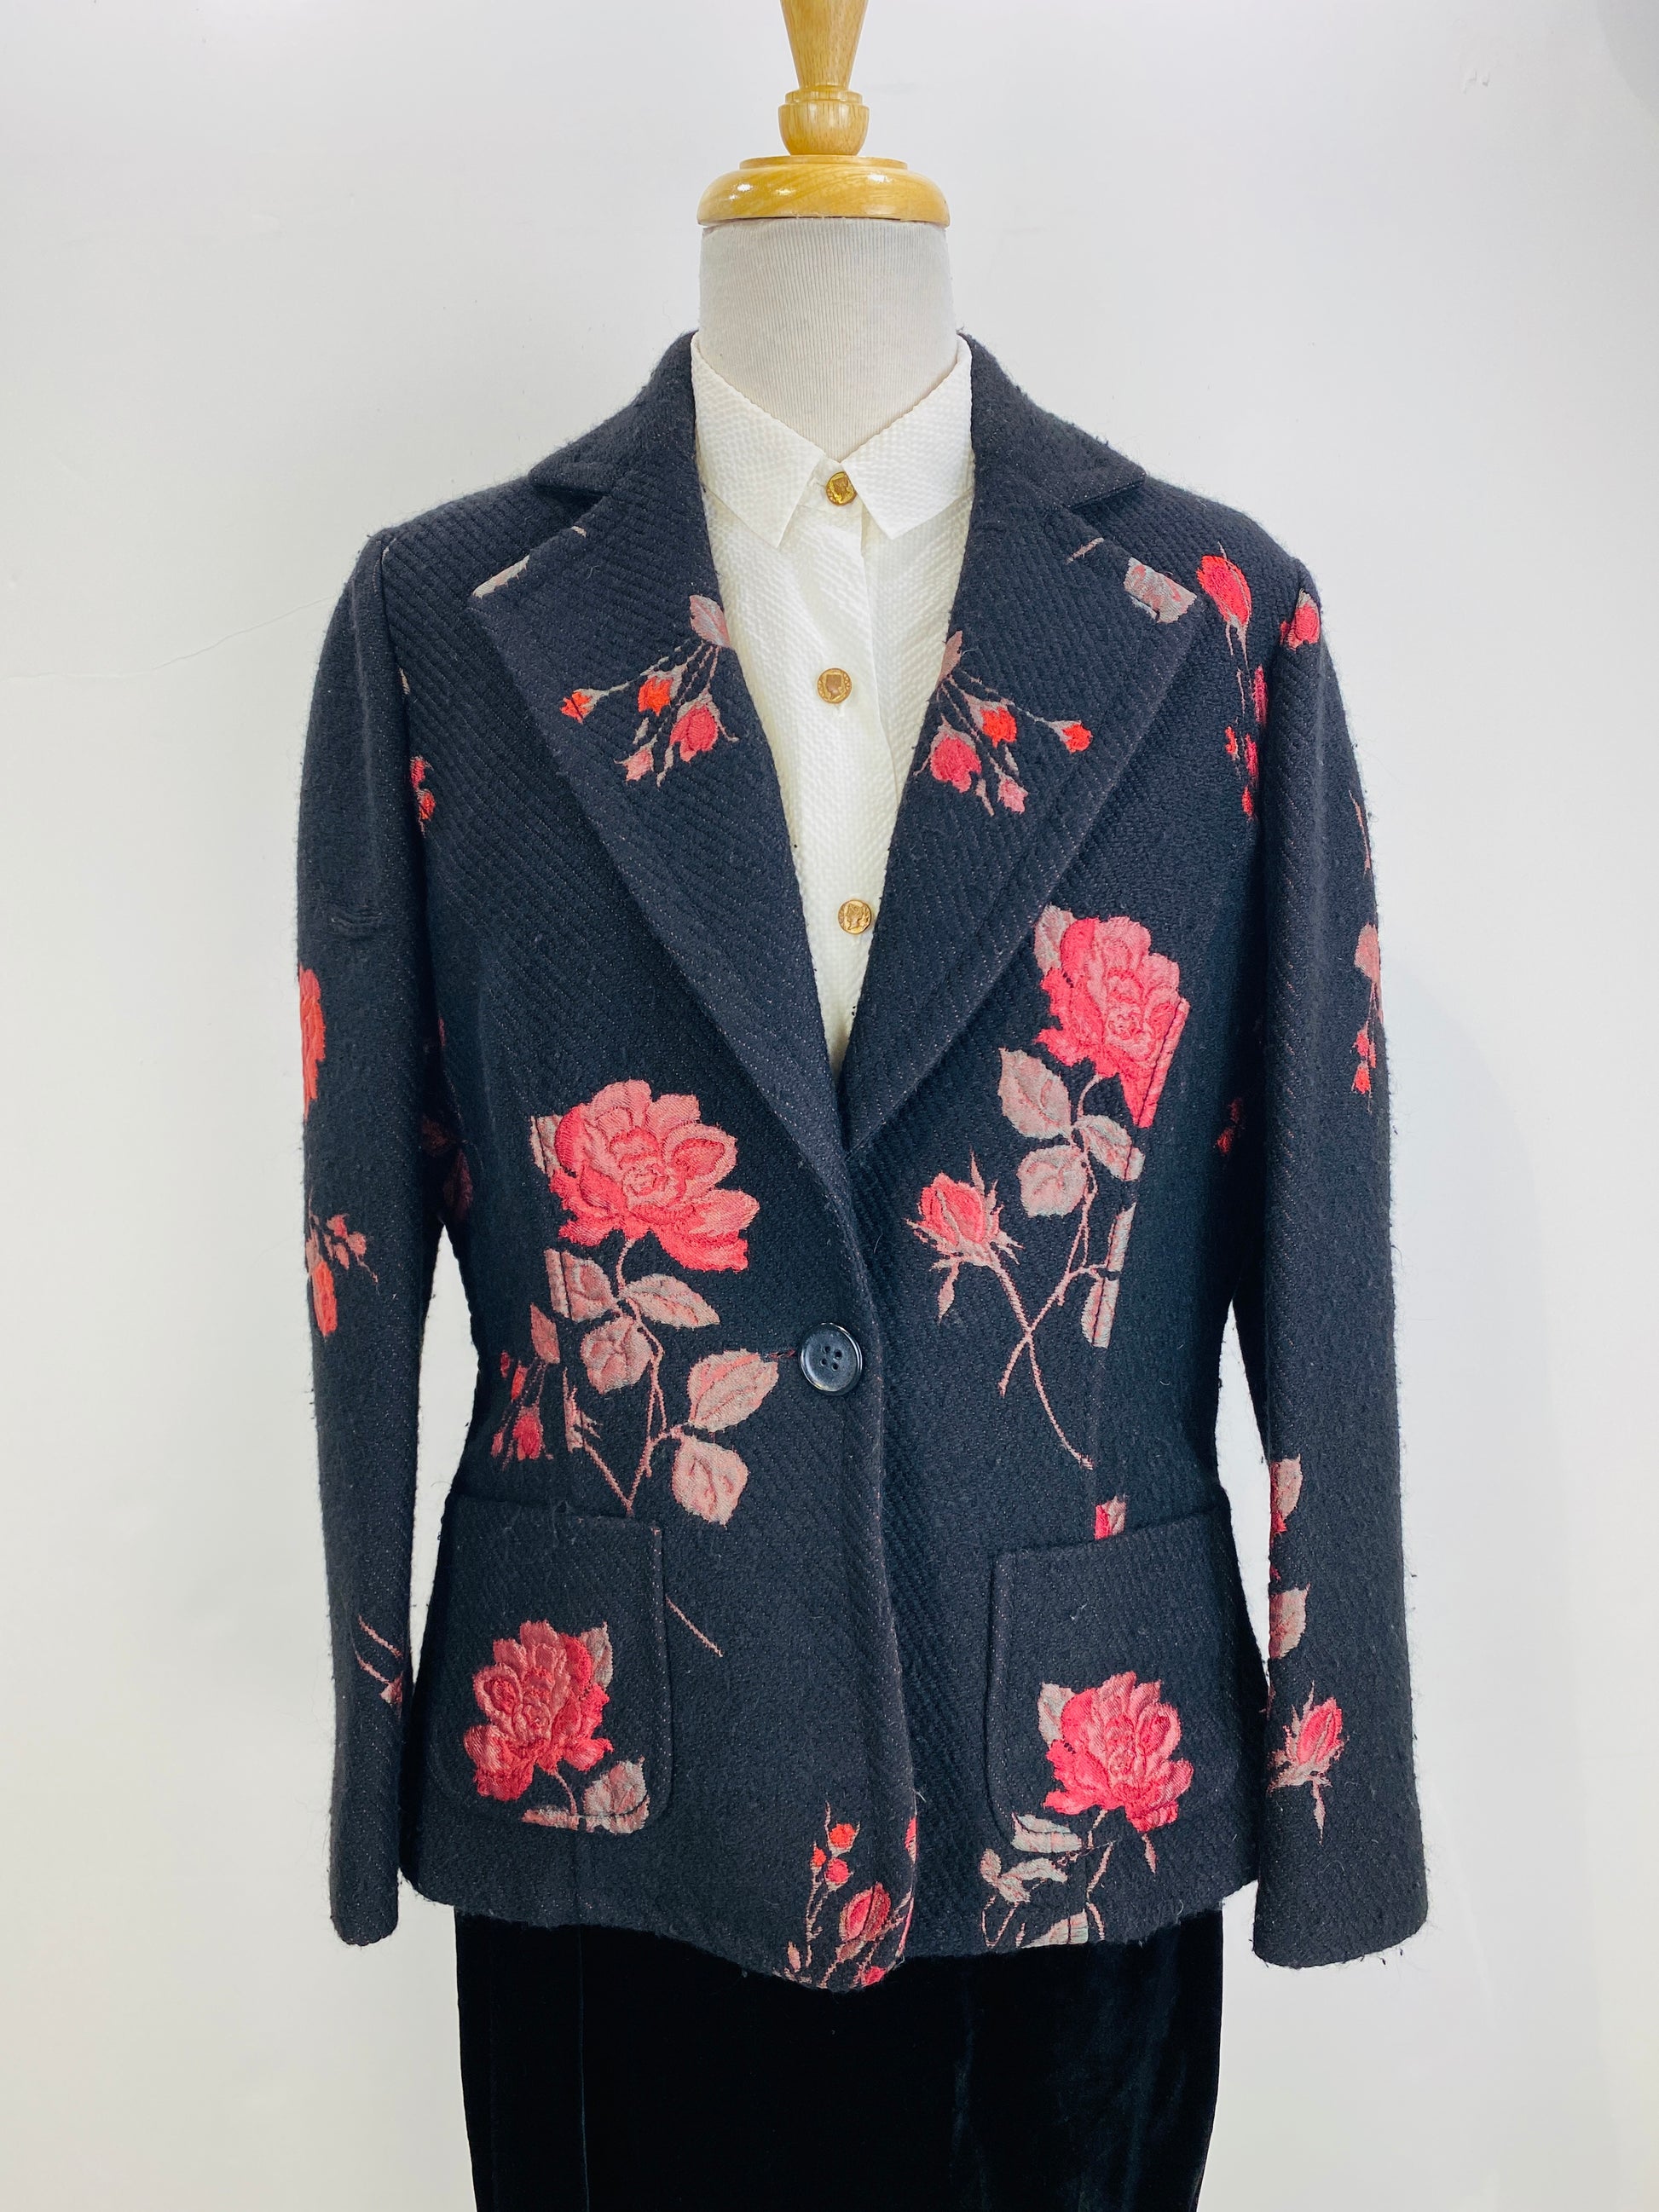 Retro tweed jacket with embroidery in dark blue